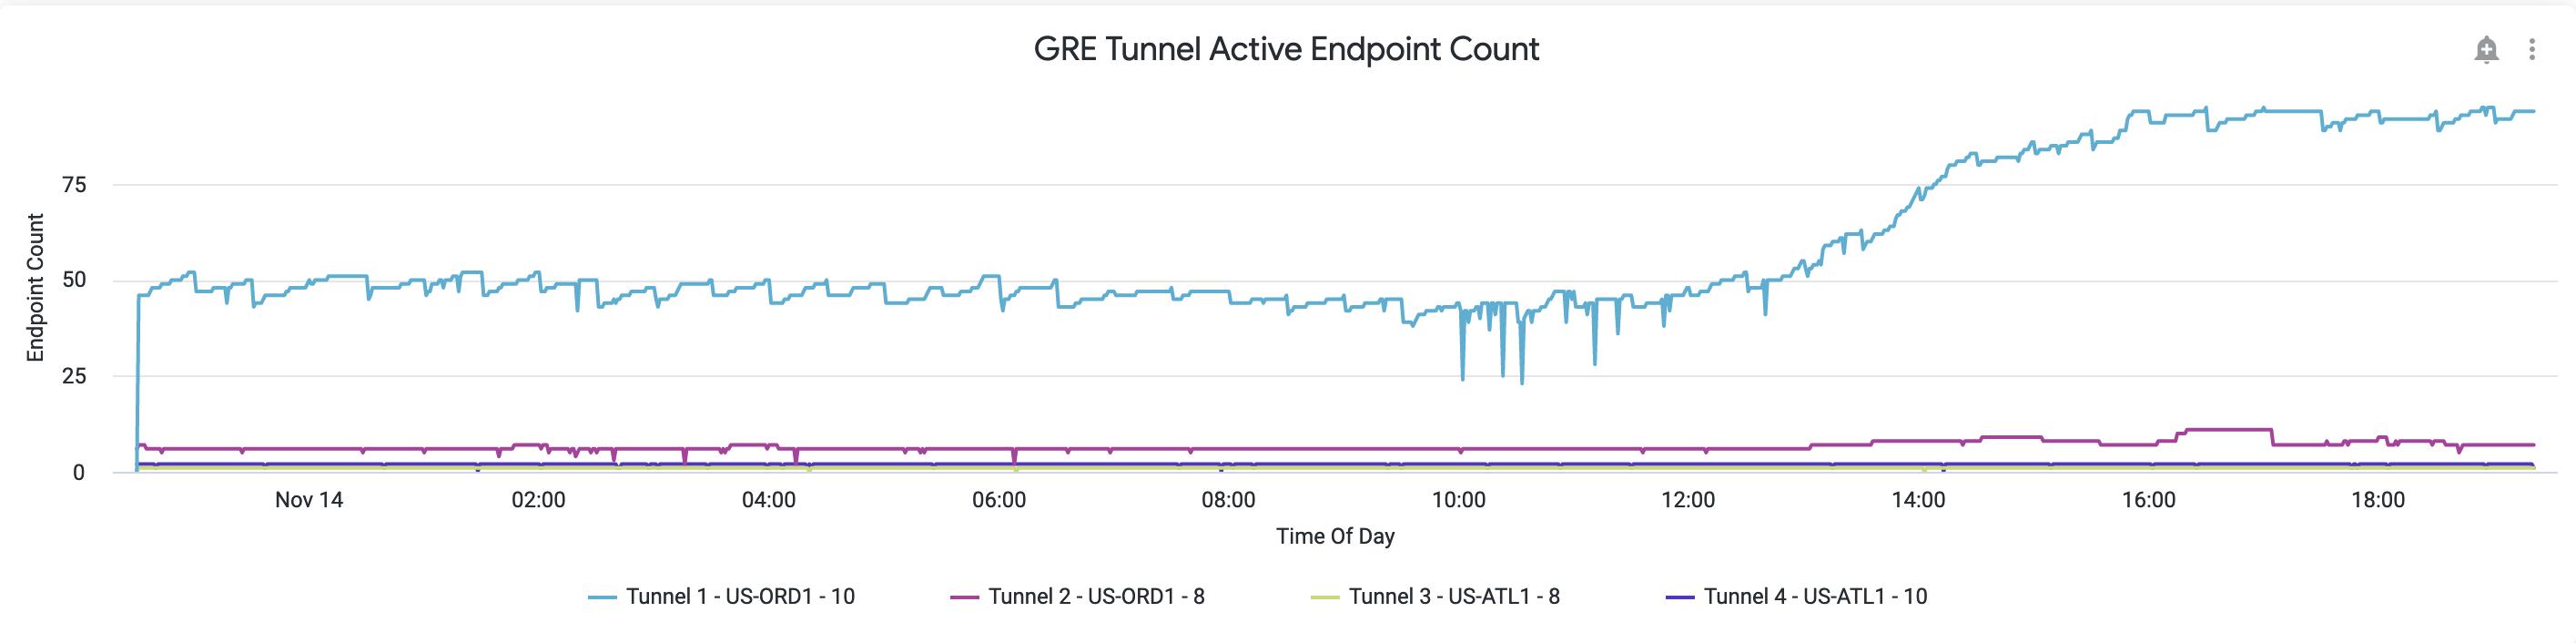 Netskope-DEM-GRE-Tunnel-Active-Endpoint-Count.png